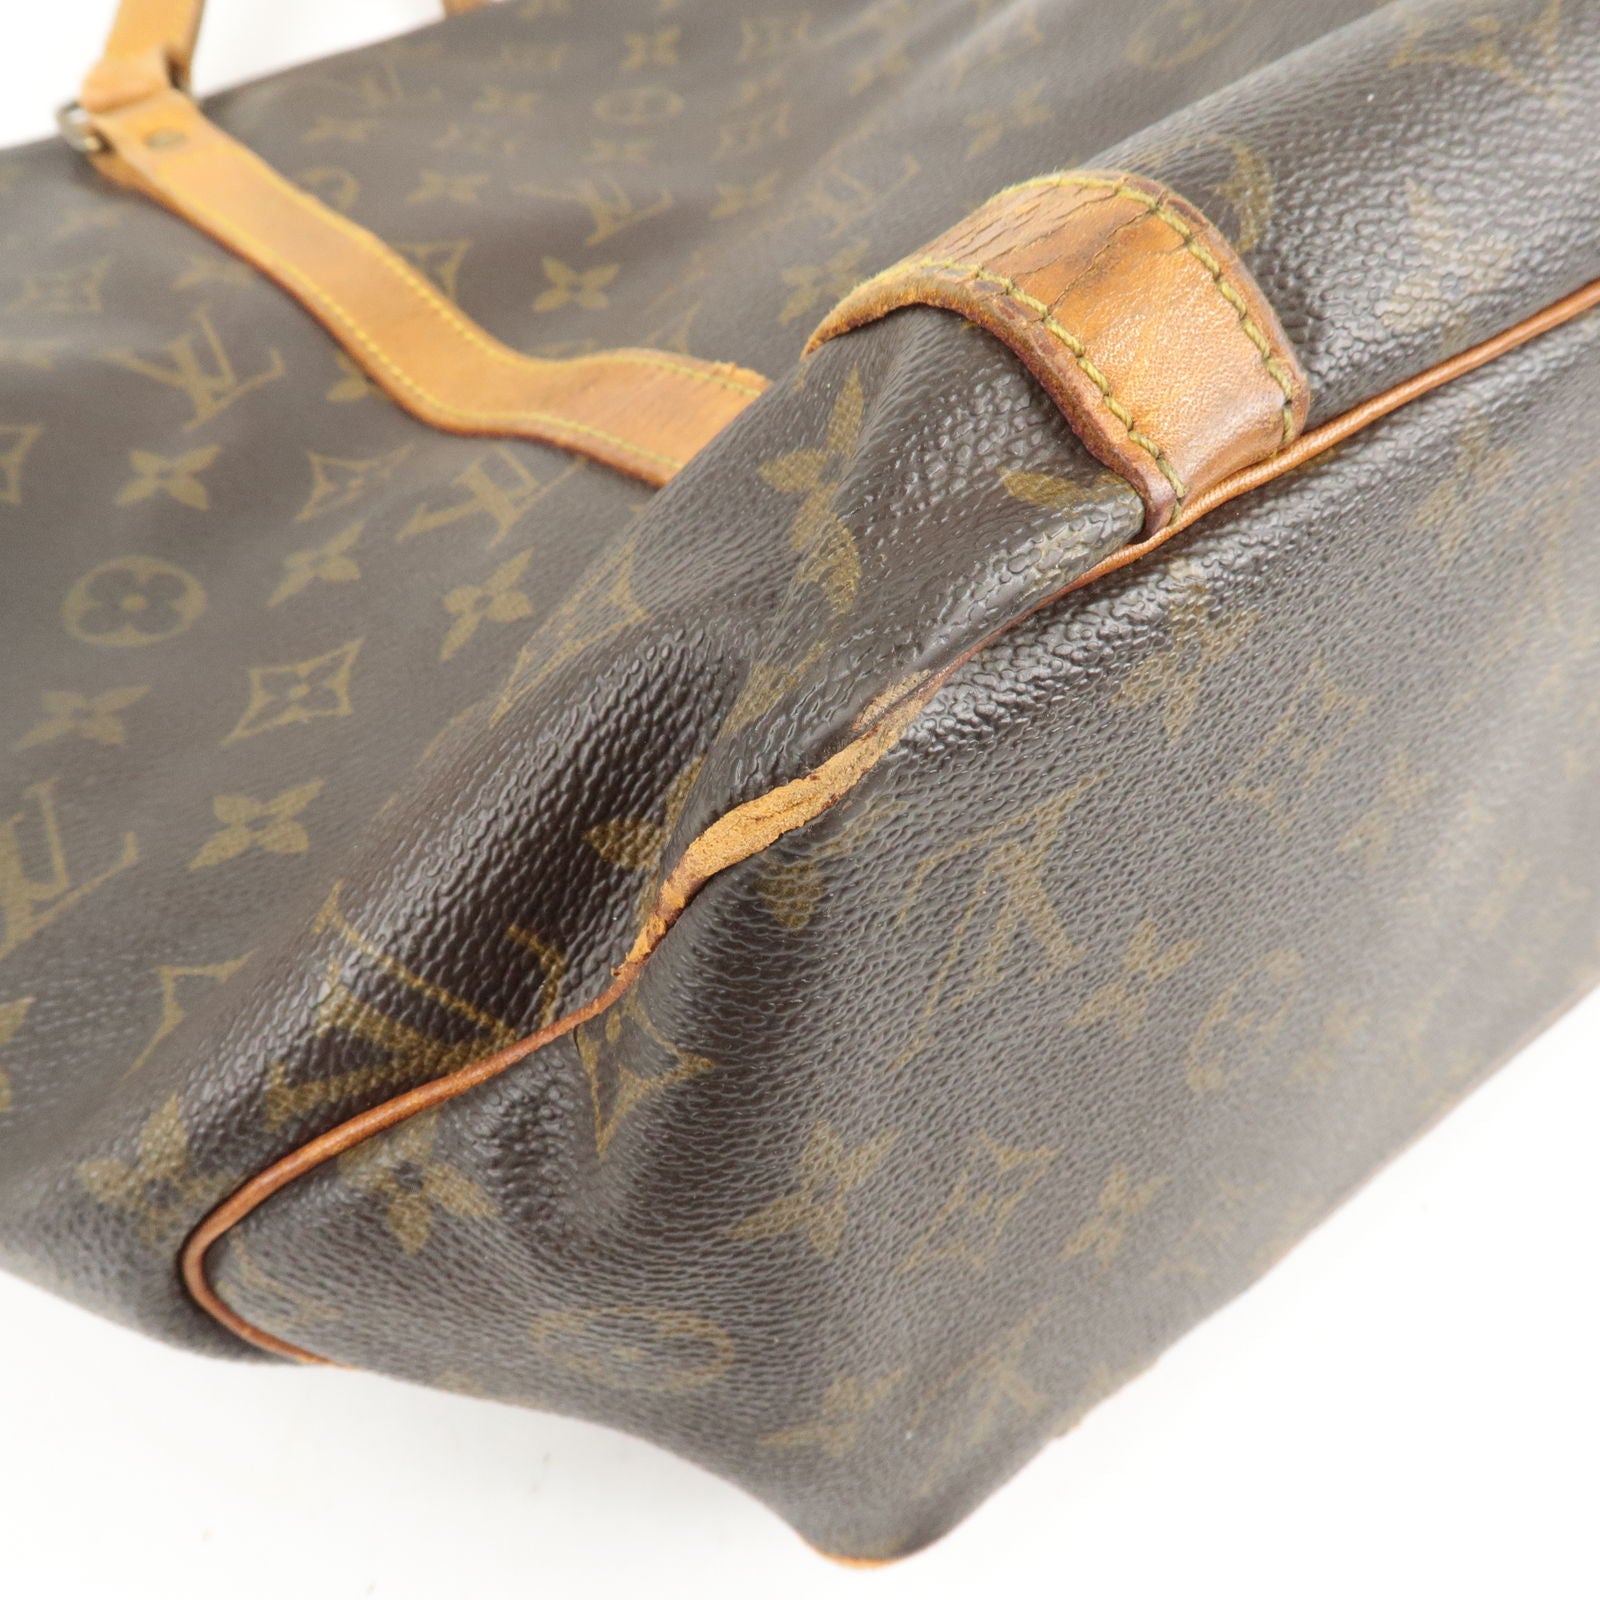 Louis Vuitton - Water Spots and Cracks on Vachetta leather Strap!